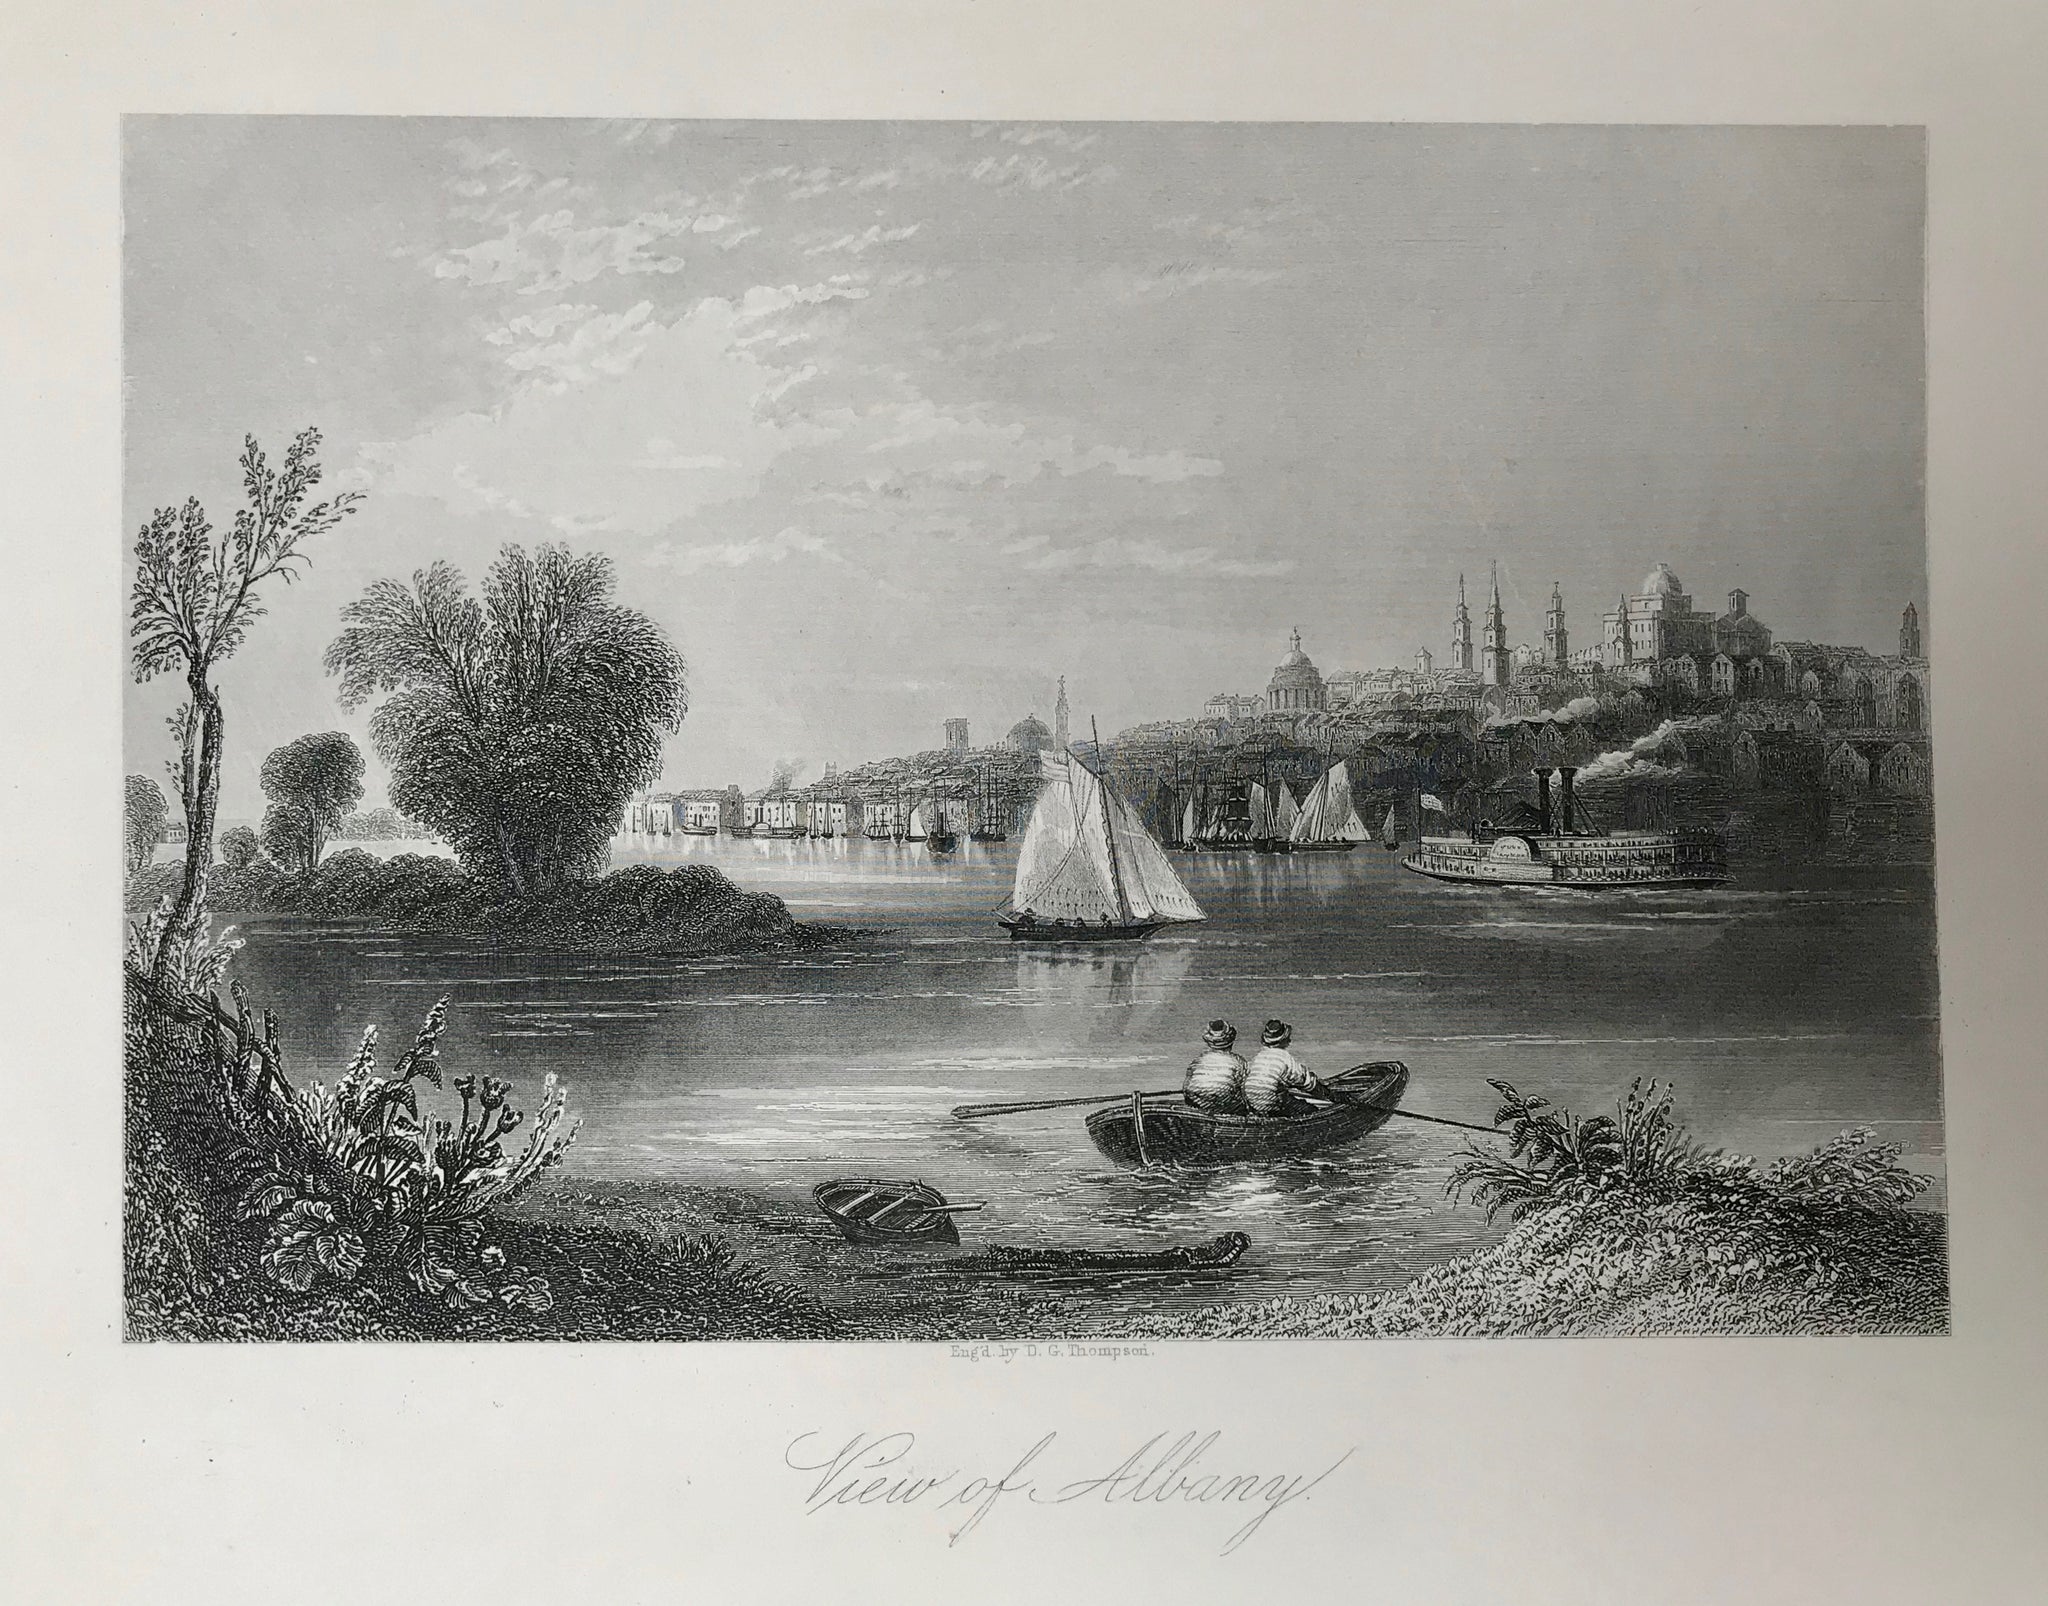 View of Albany  Steel etching by D.G. Thompson, ca 1850. Print has very wide margins.